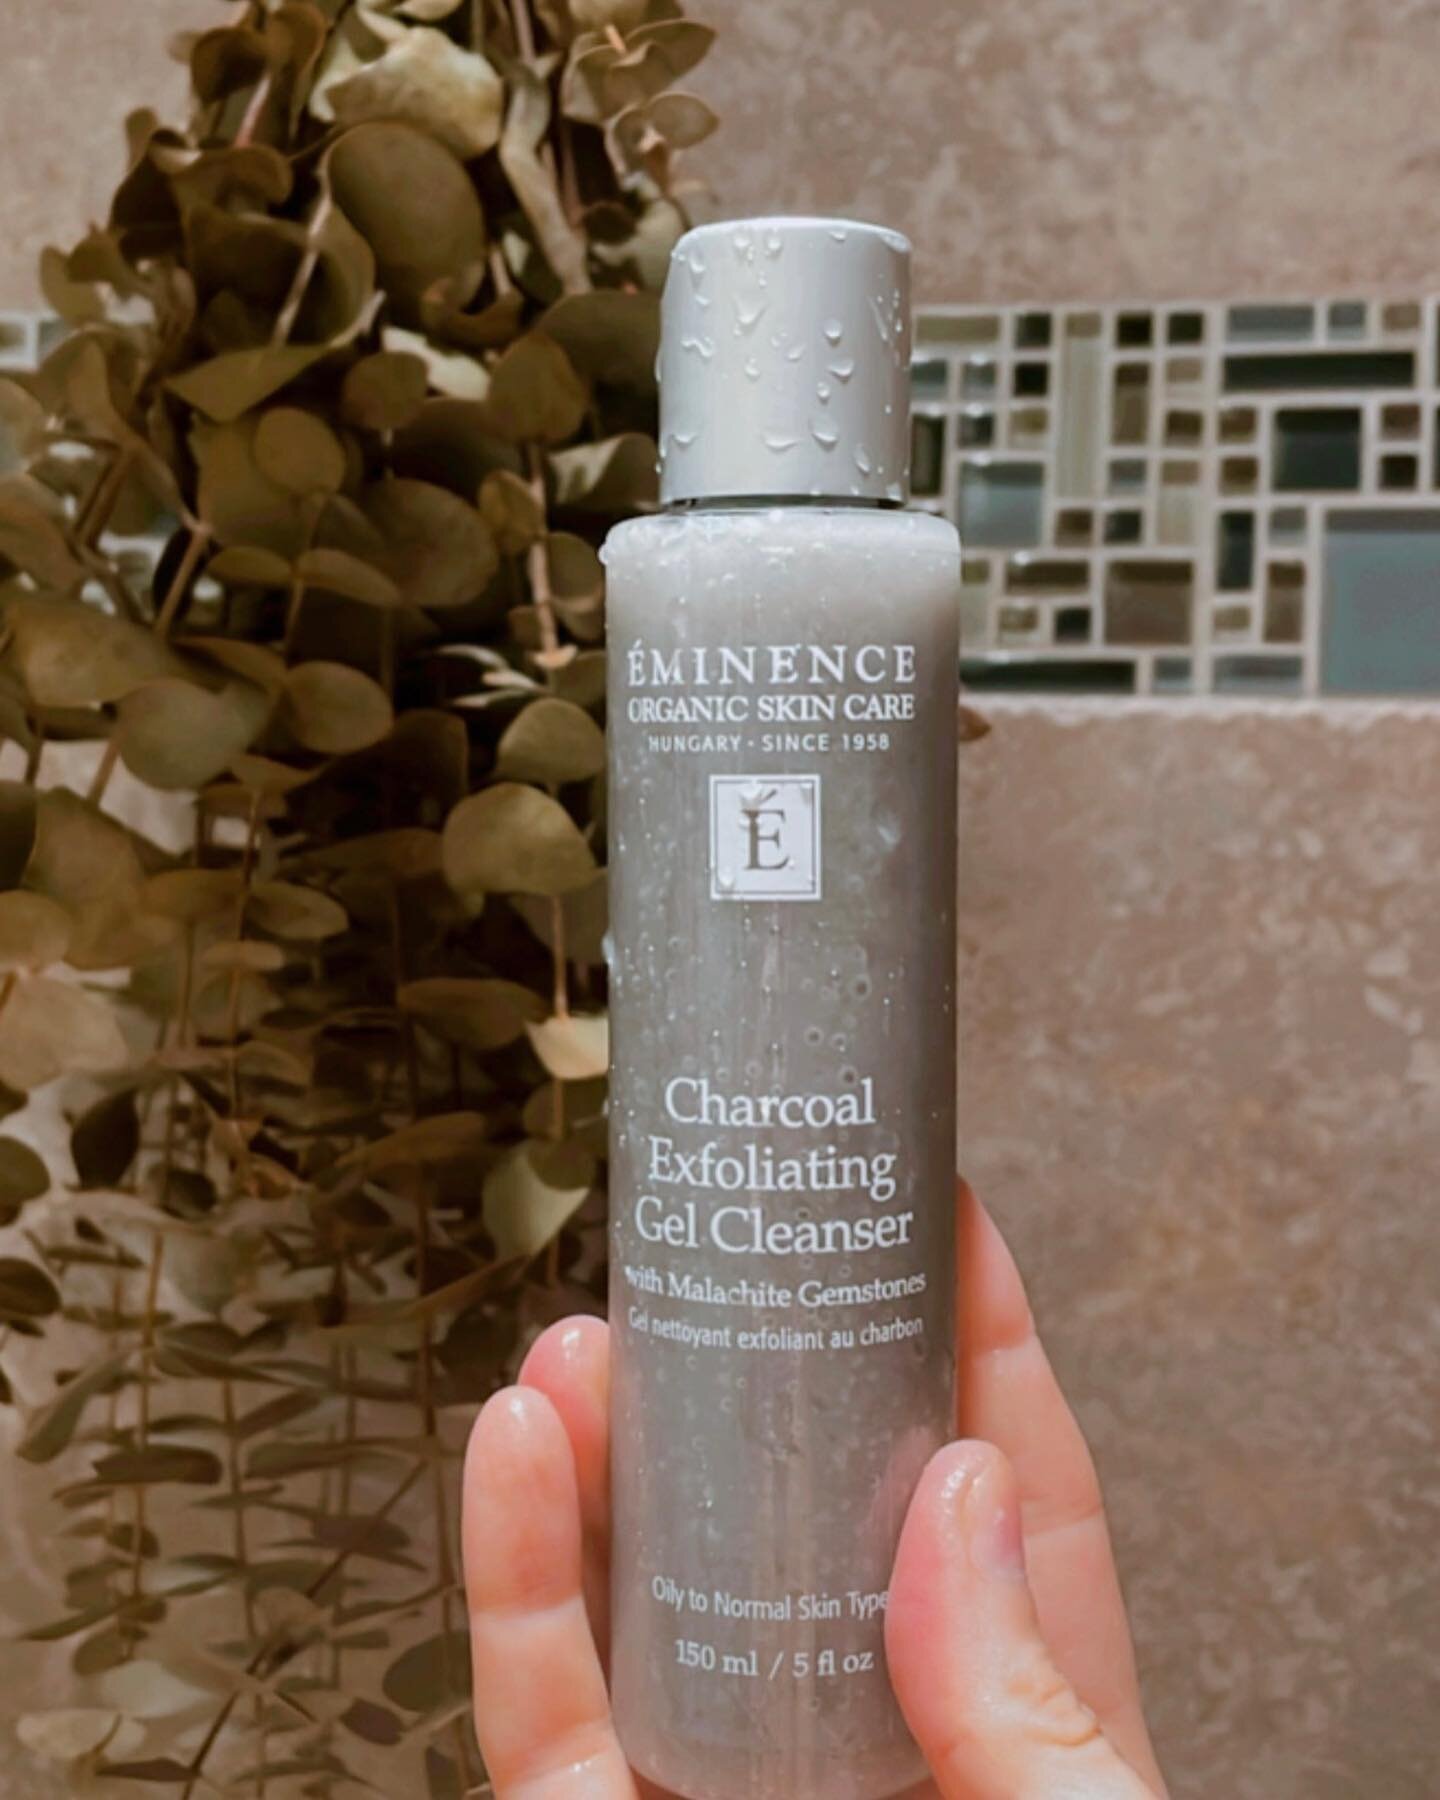 My Eminence Charcoal Scrub is the BEST exfoliating product! It&rsquo;s the perfect formulation to get rid of dull, flaky skin without being too harsh. Smells so good! You will be equally obsessed once you try it! #acnesafe 

Make sure to follow your 